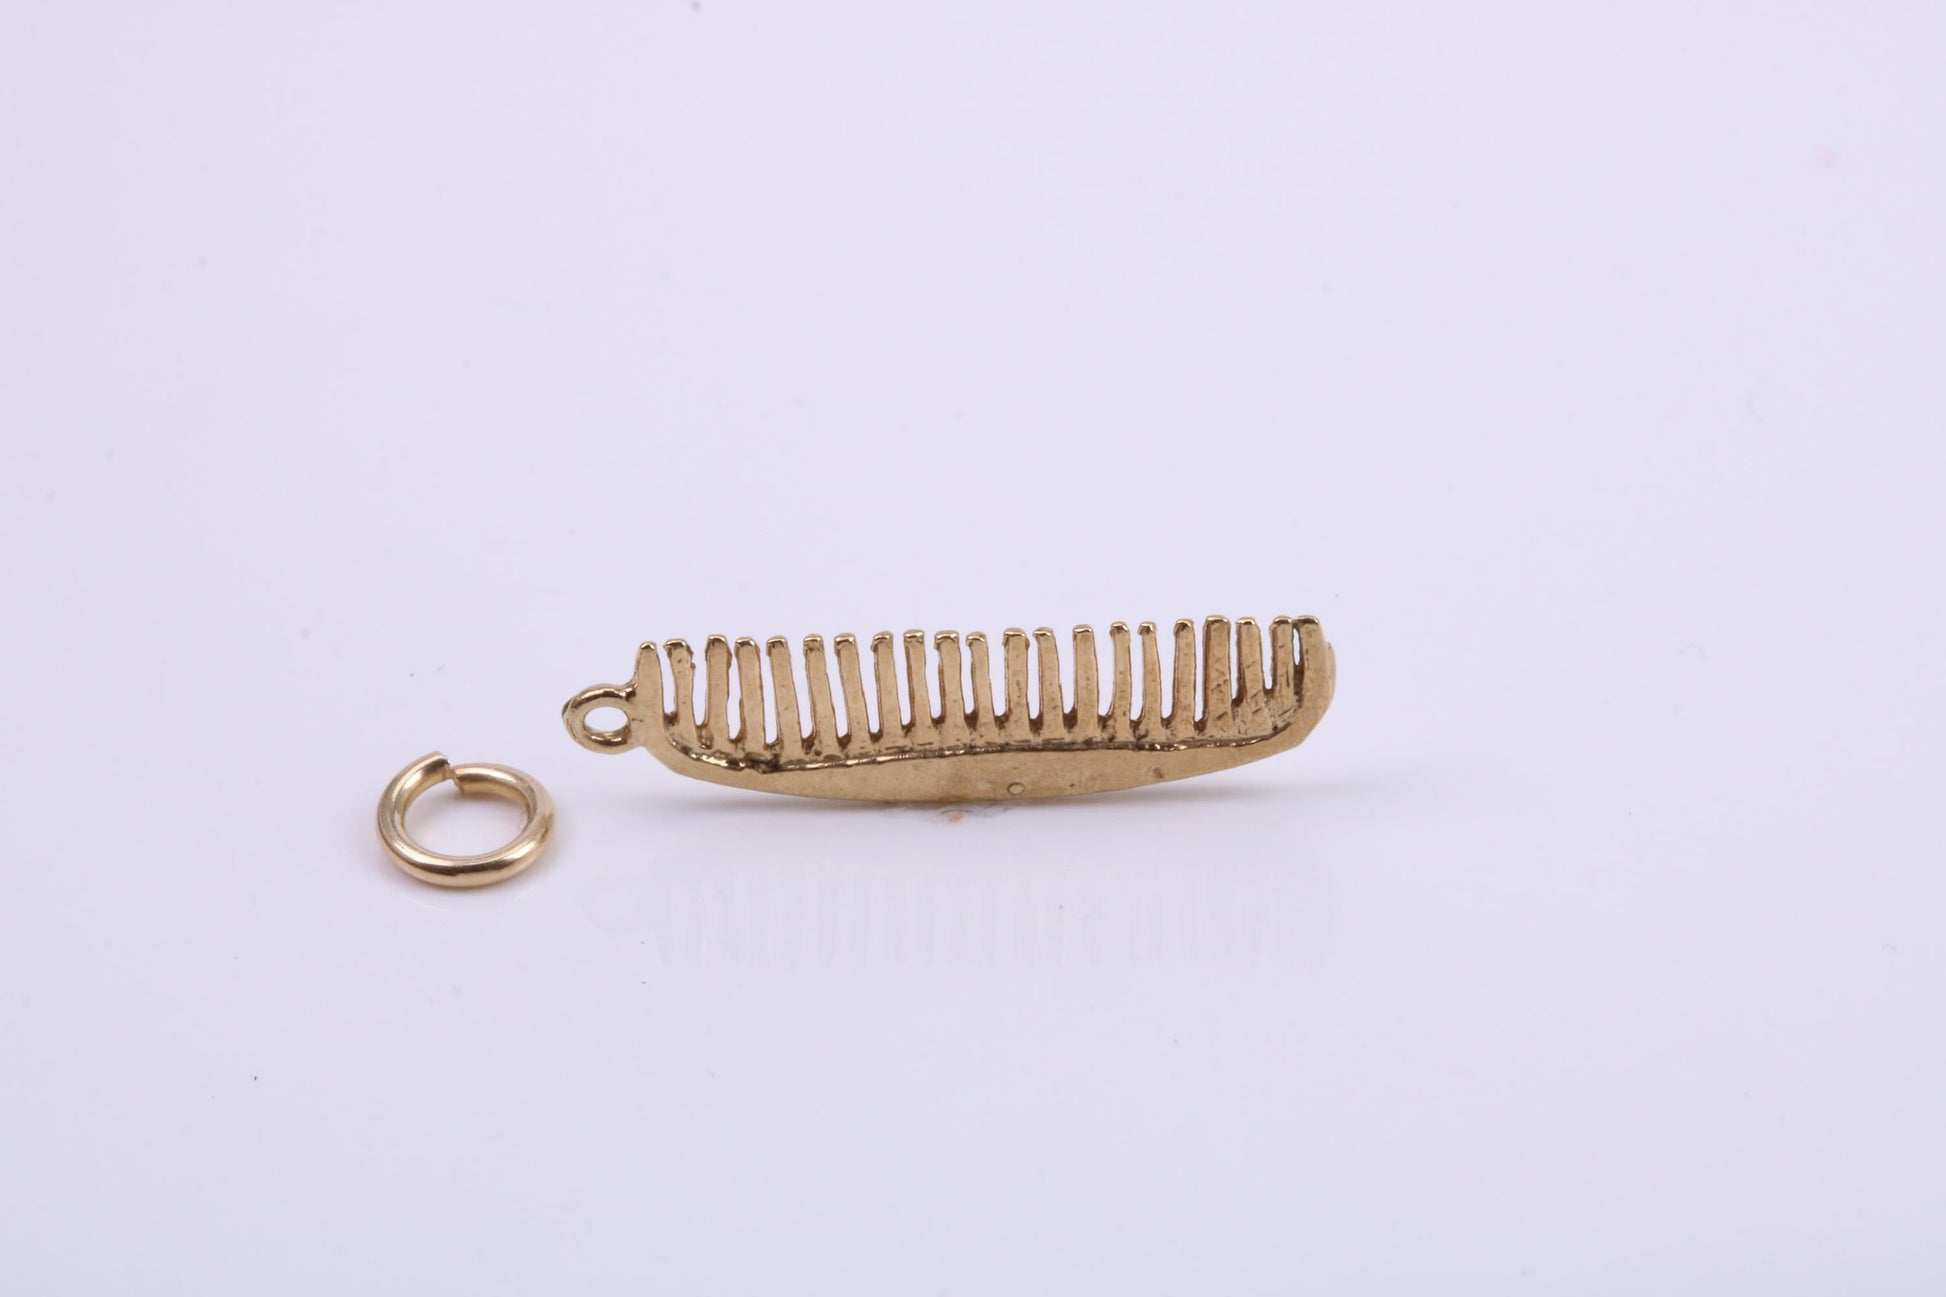 Hair Comb Charm, Traditional Charm, Made from Solid 9ct Yellow Gold, British Hallmarked, Complete with Attachment Link